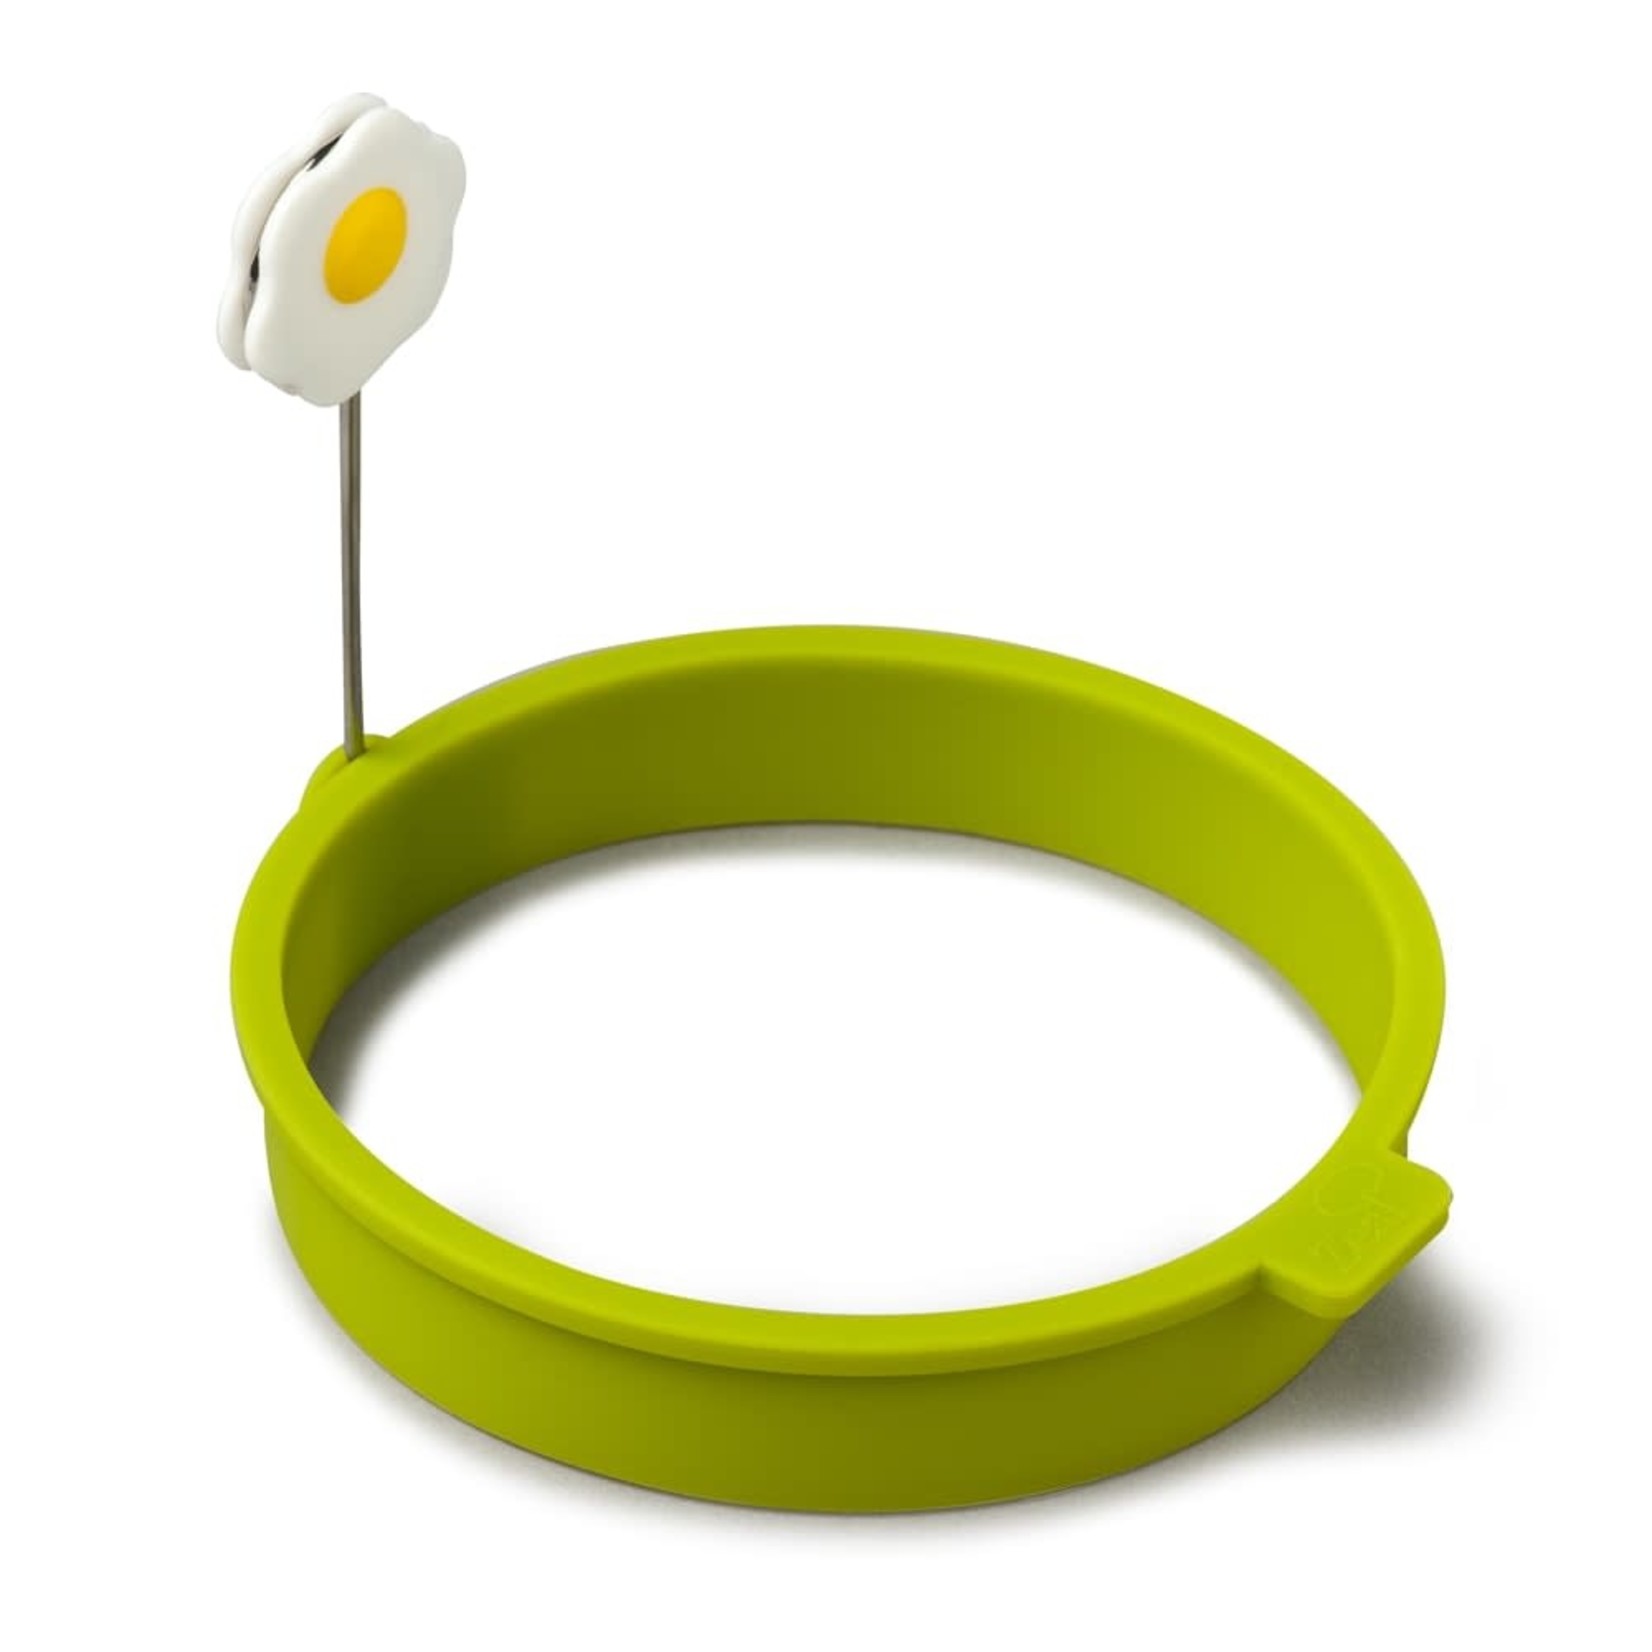 ZEAL ZEAL Silicone Egg Ring - Assorted